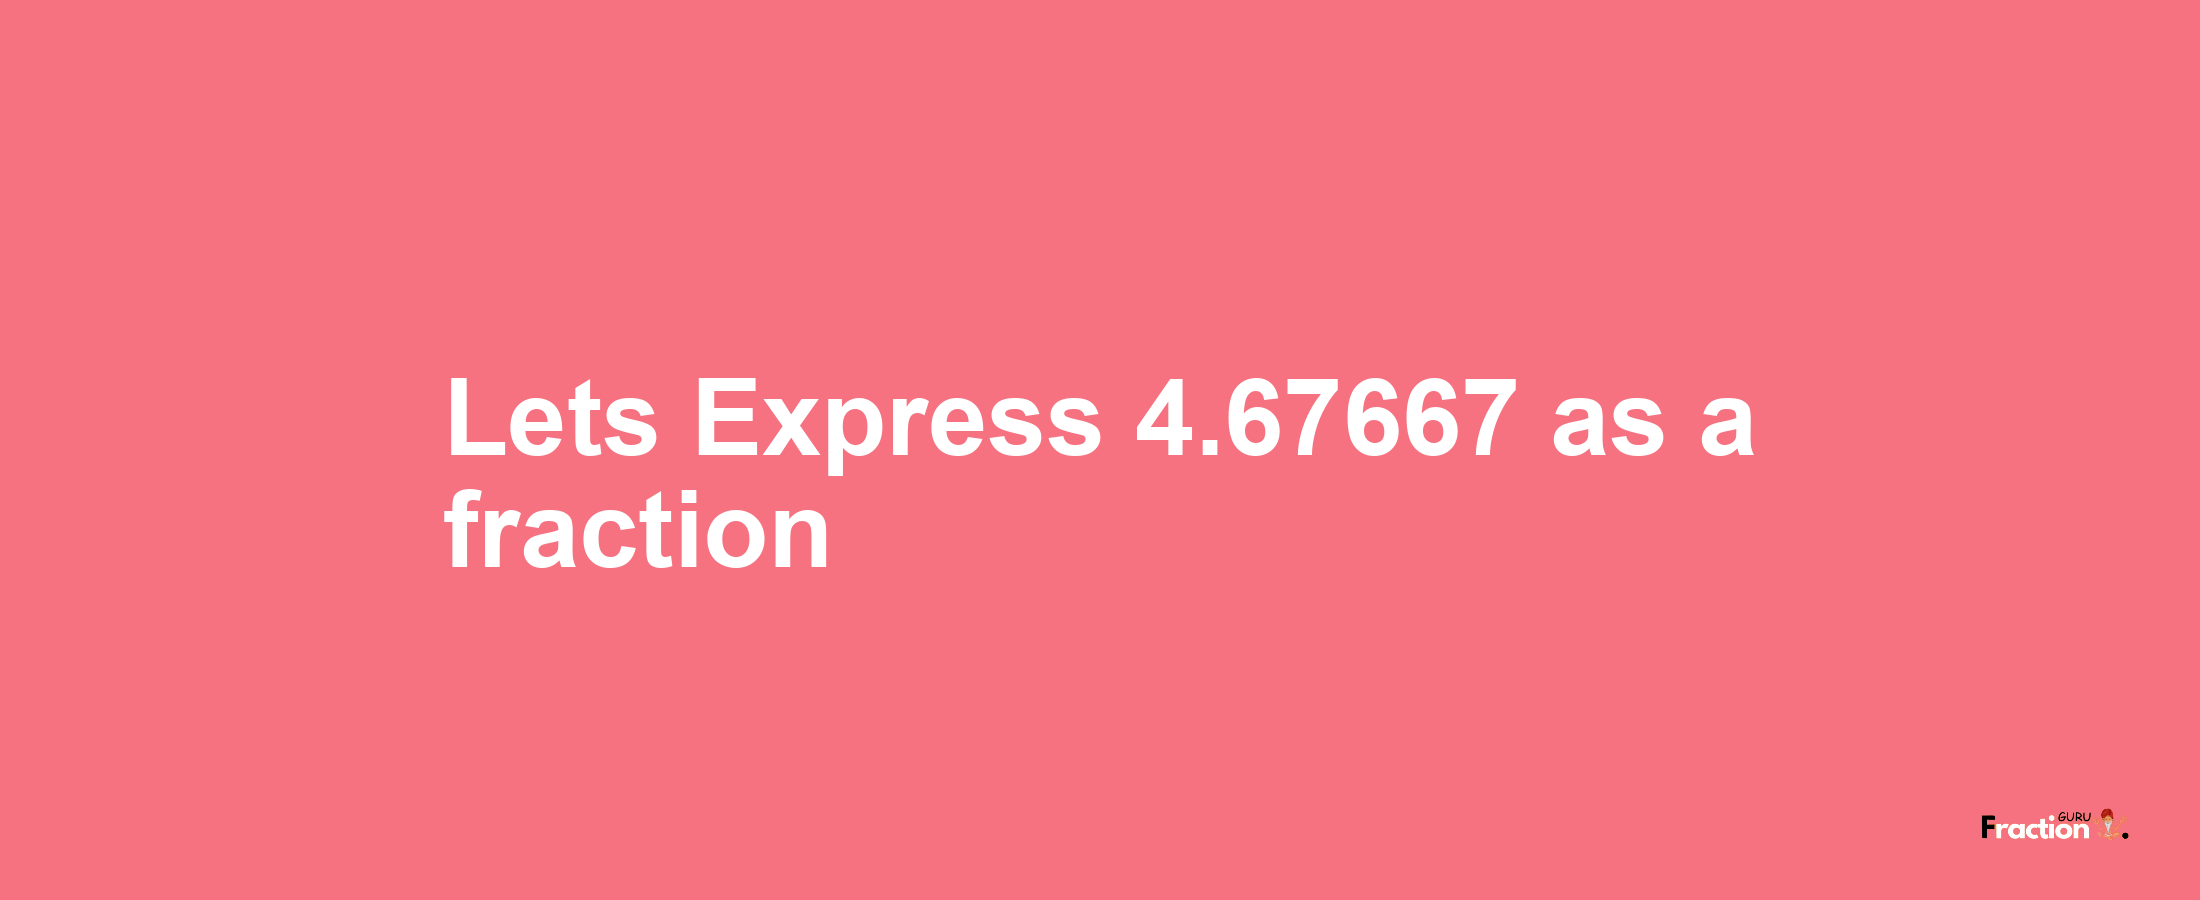 Lets Express 4.67667 as afraction